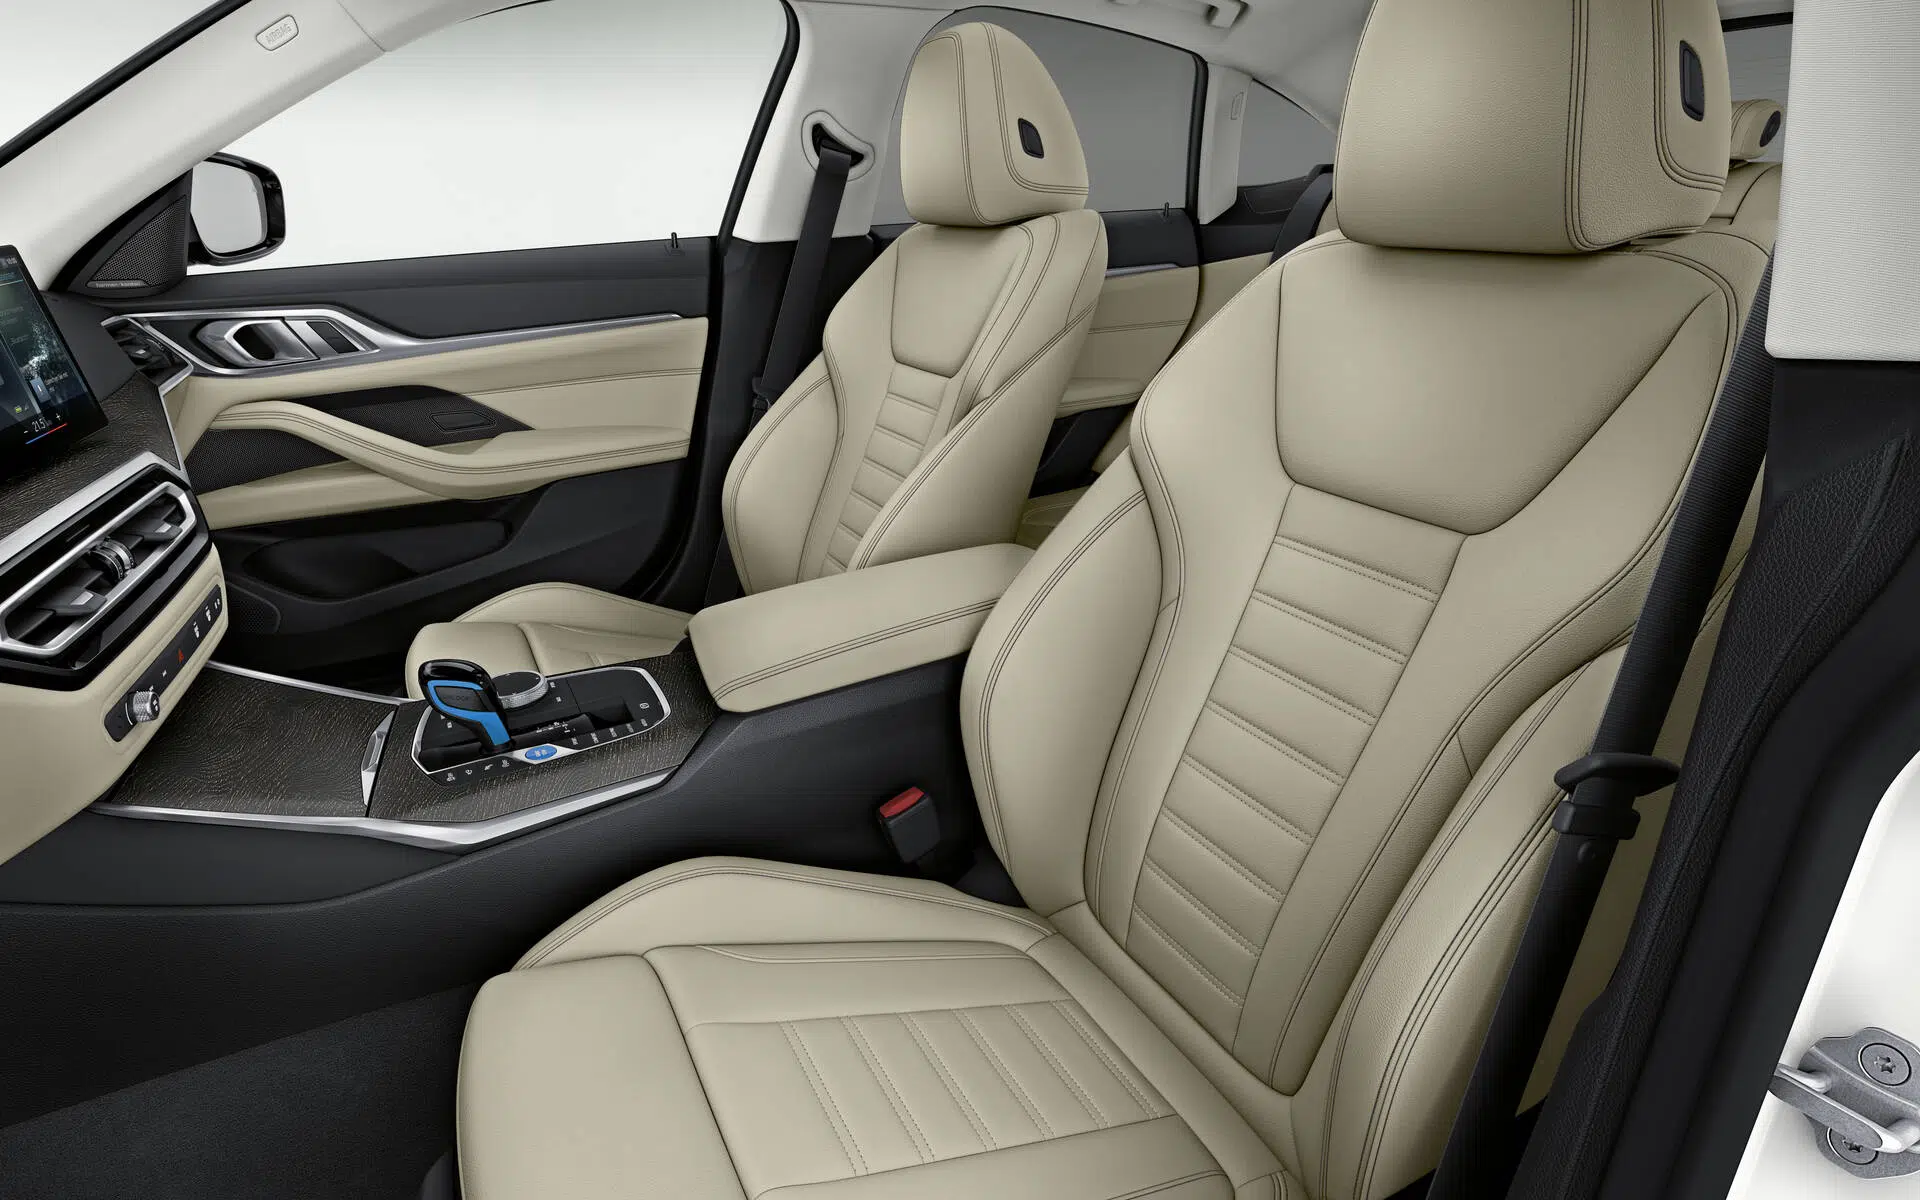 Comfort assured in the 2022 BMW i4! Source: www.guideauto.ca